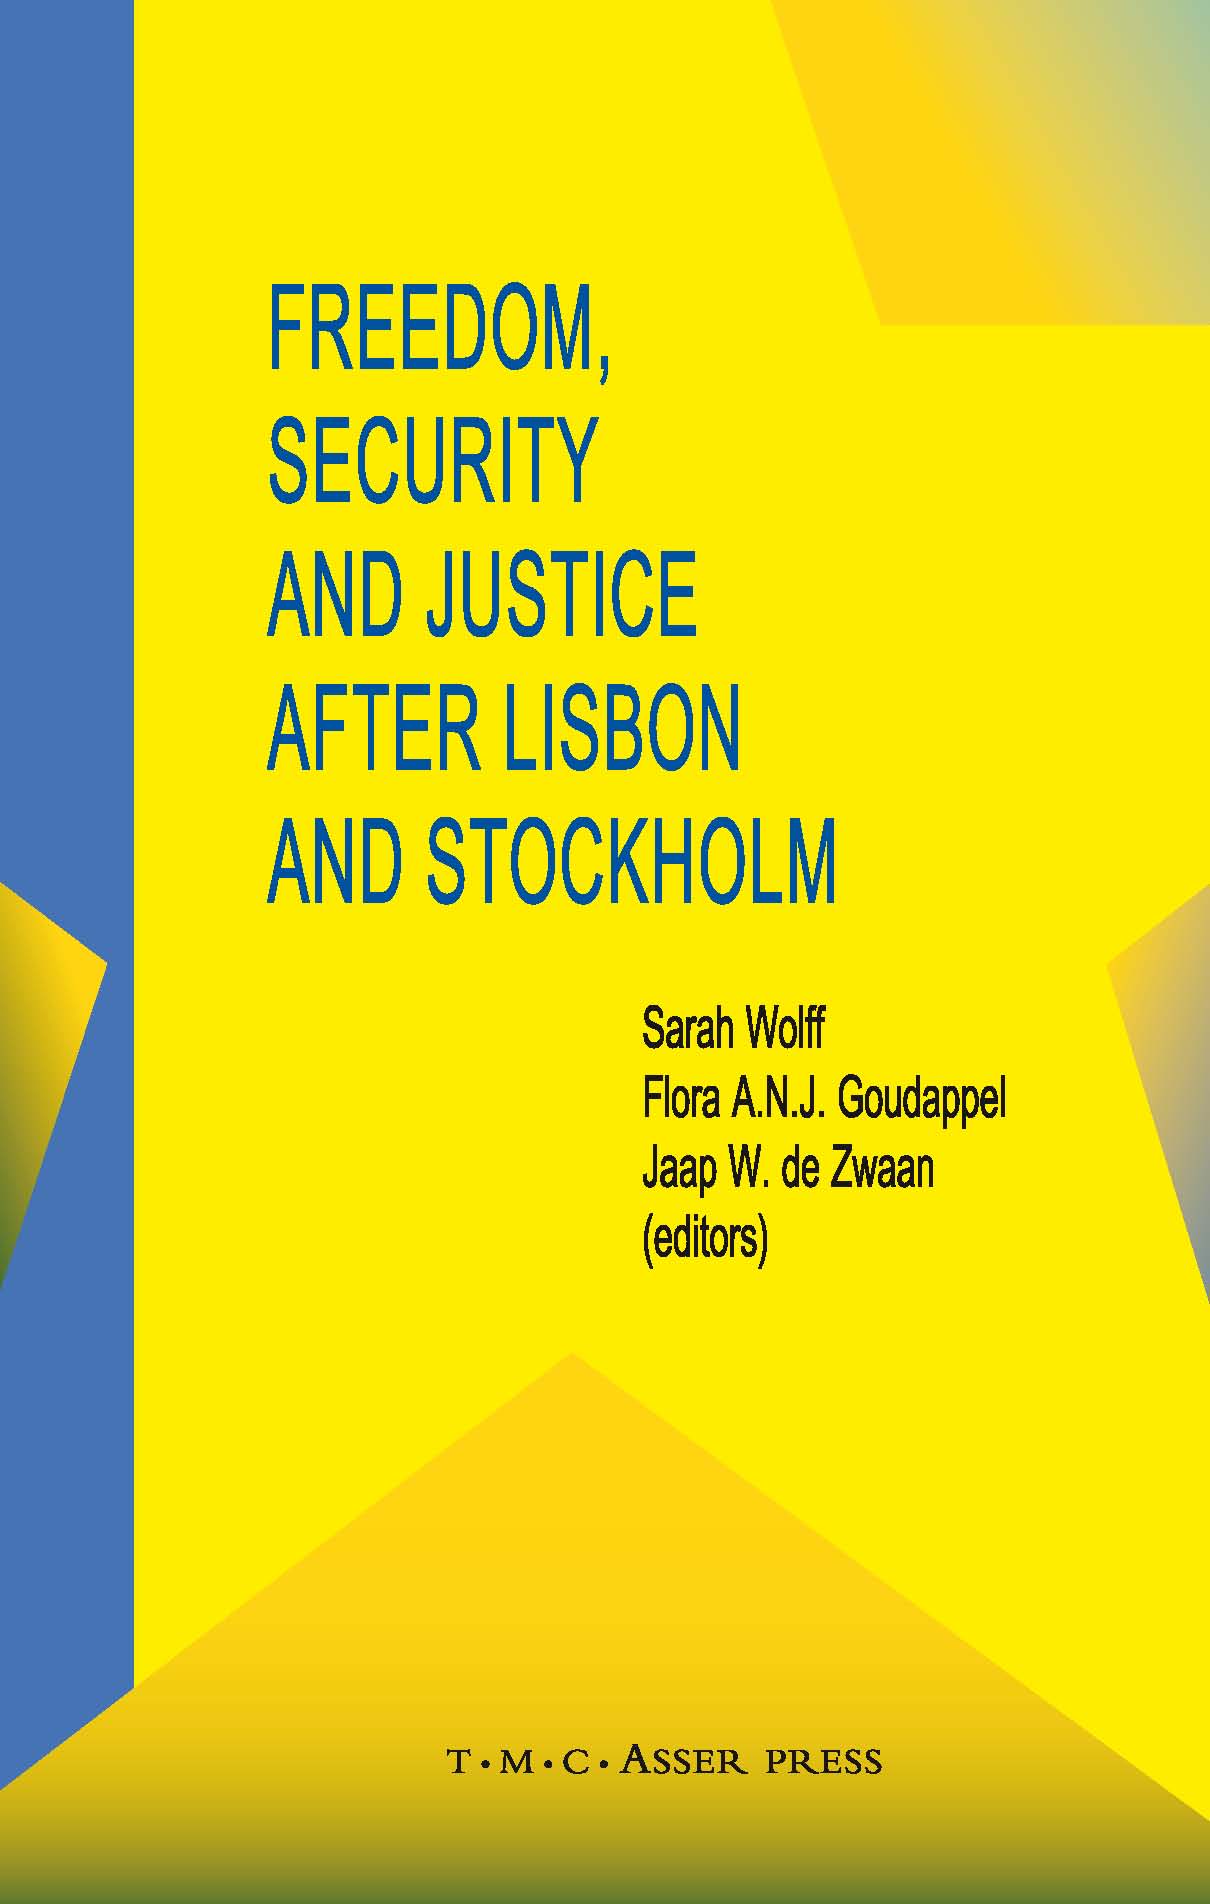 Freedom, Security and Justice after Lisbon and Stockholm